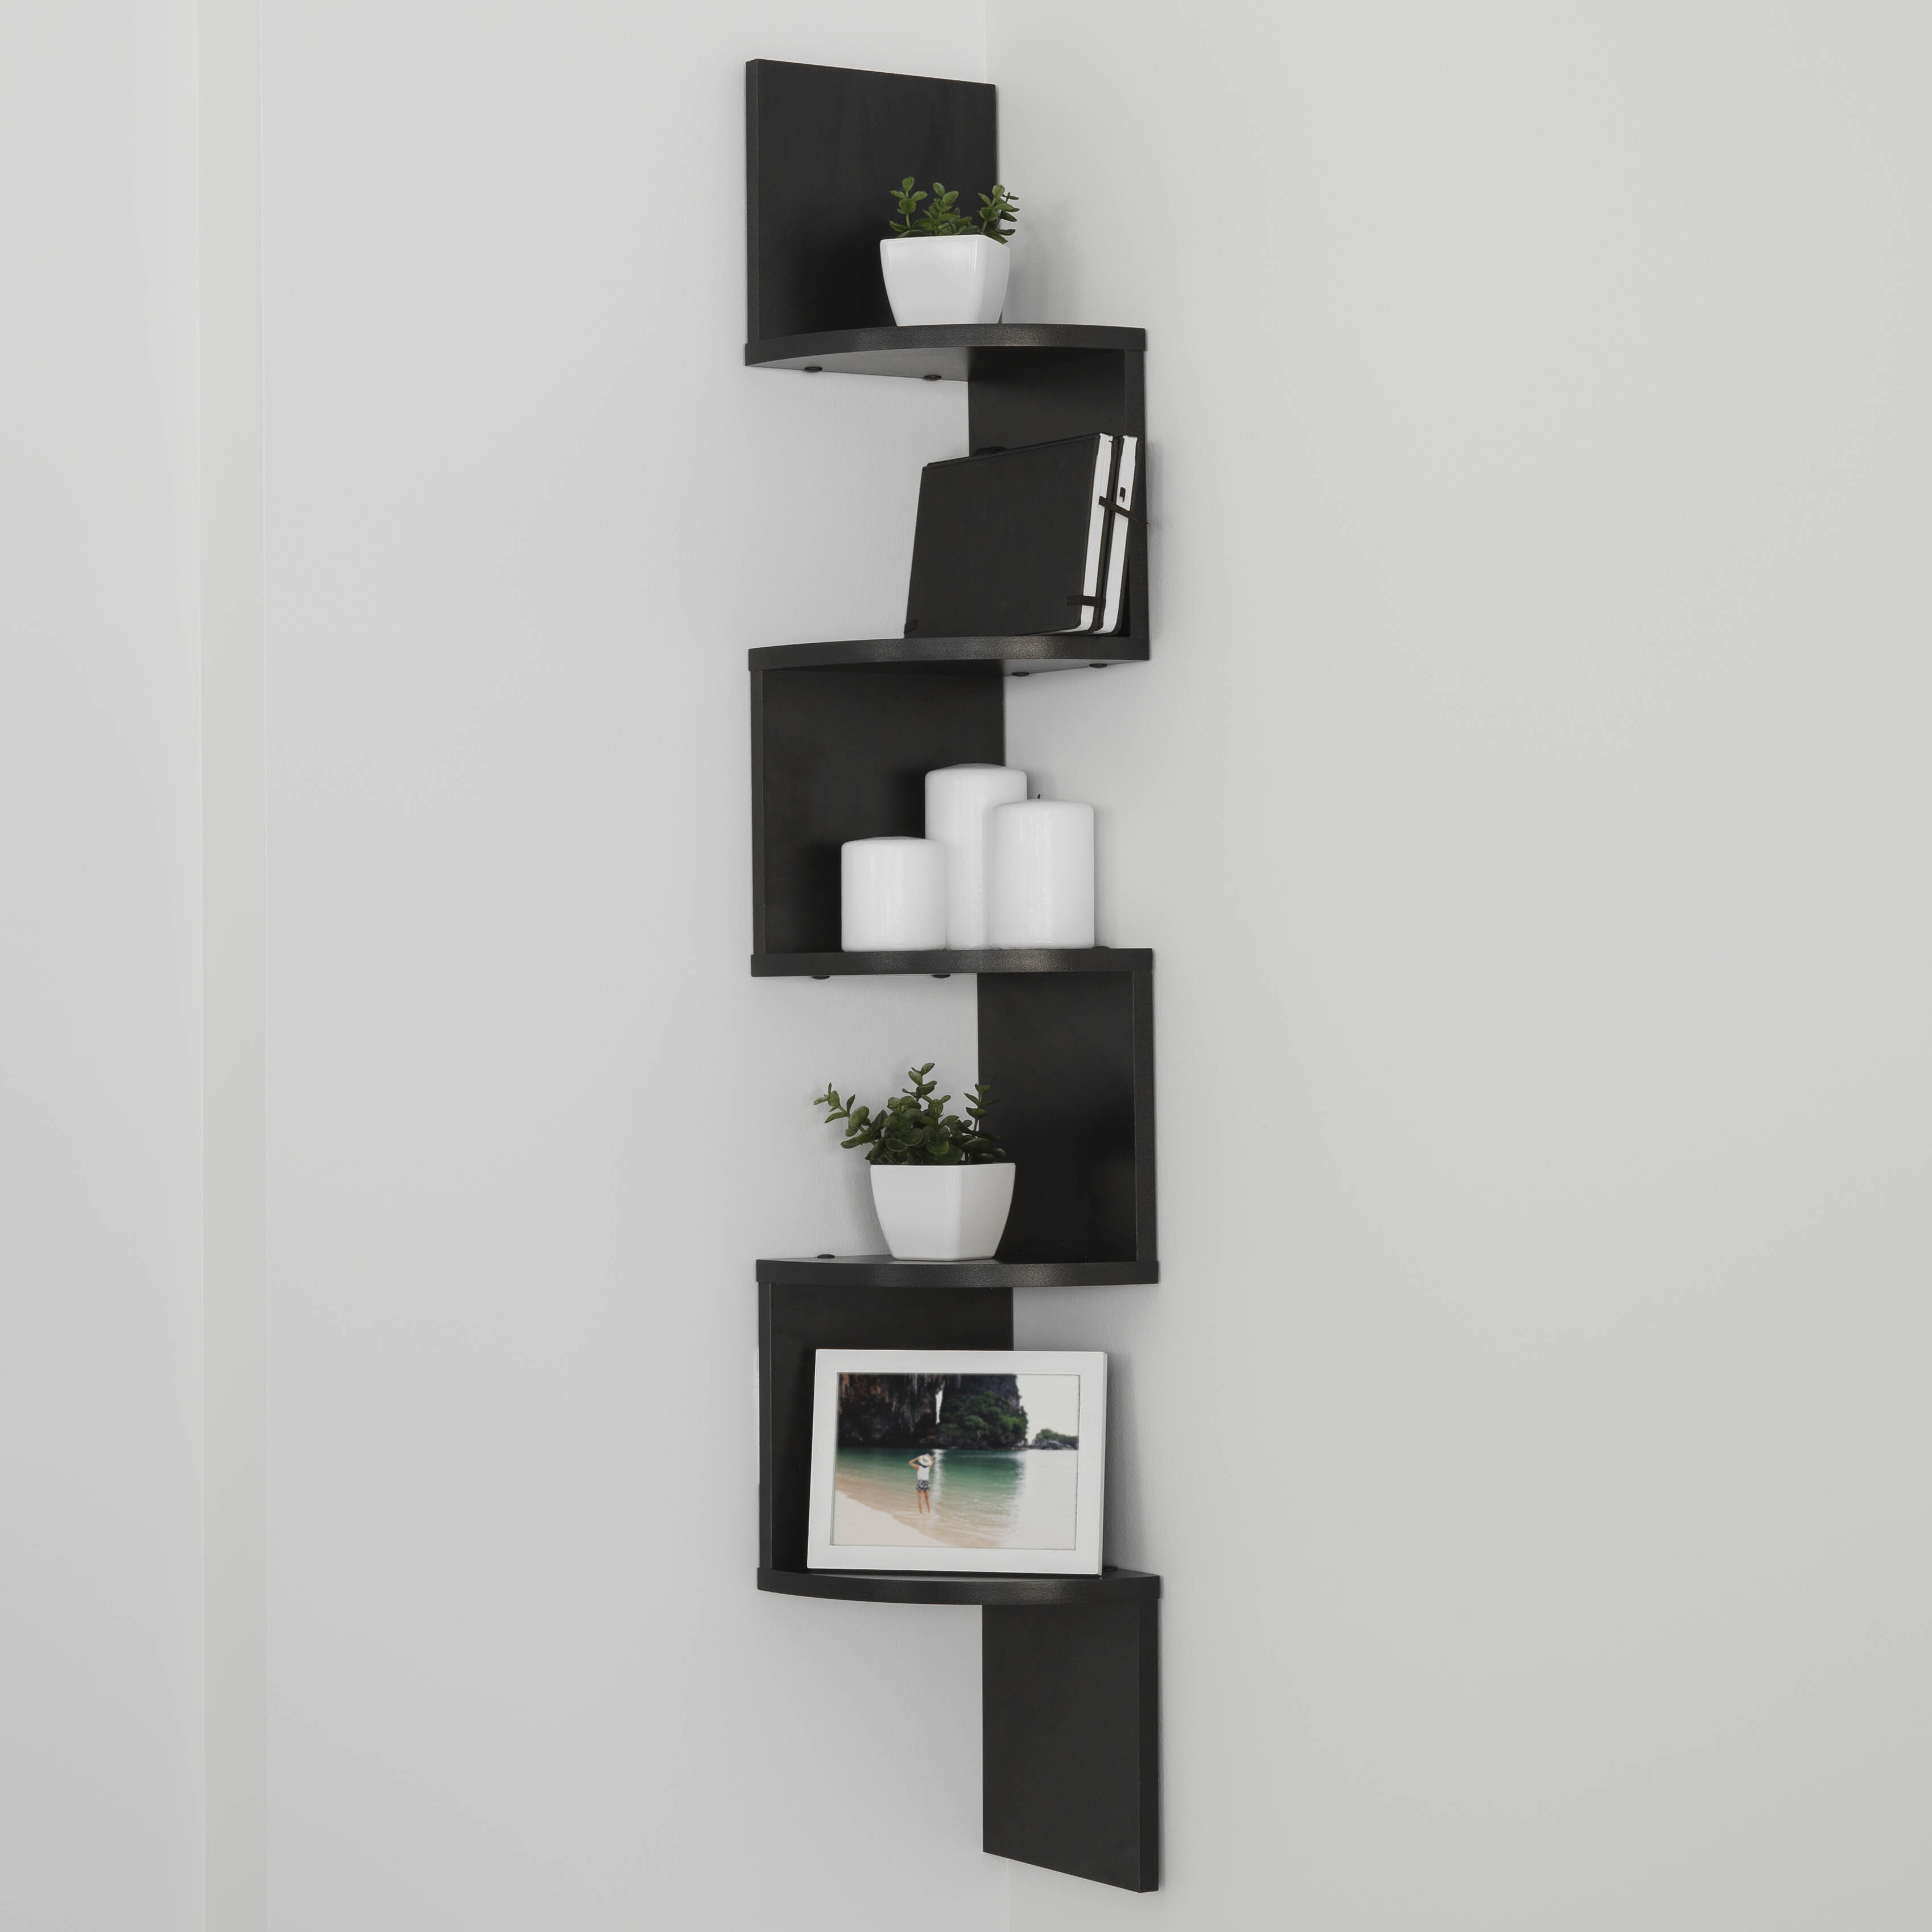 Details about   Wall Mount Shelf Set Of 4 Floating Display Home Decor White Shelves Furniture 